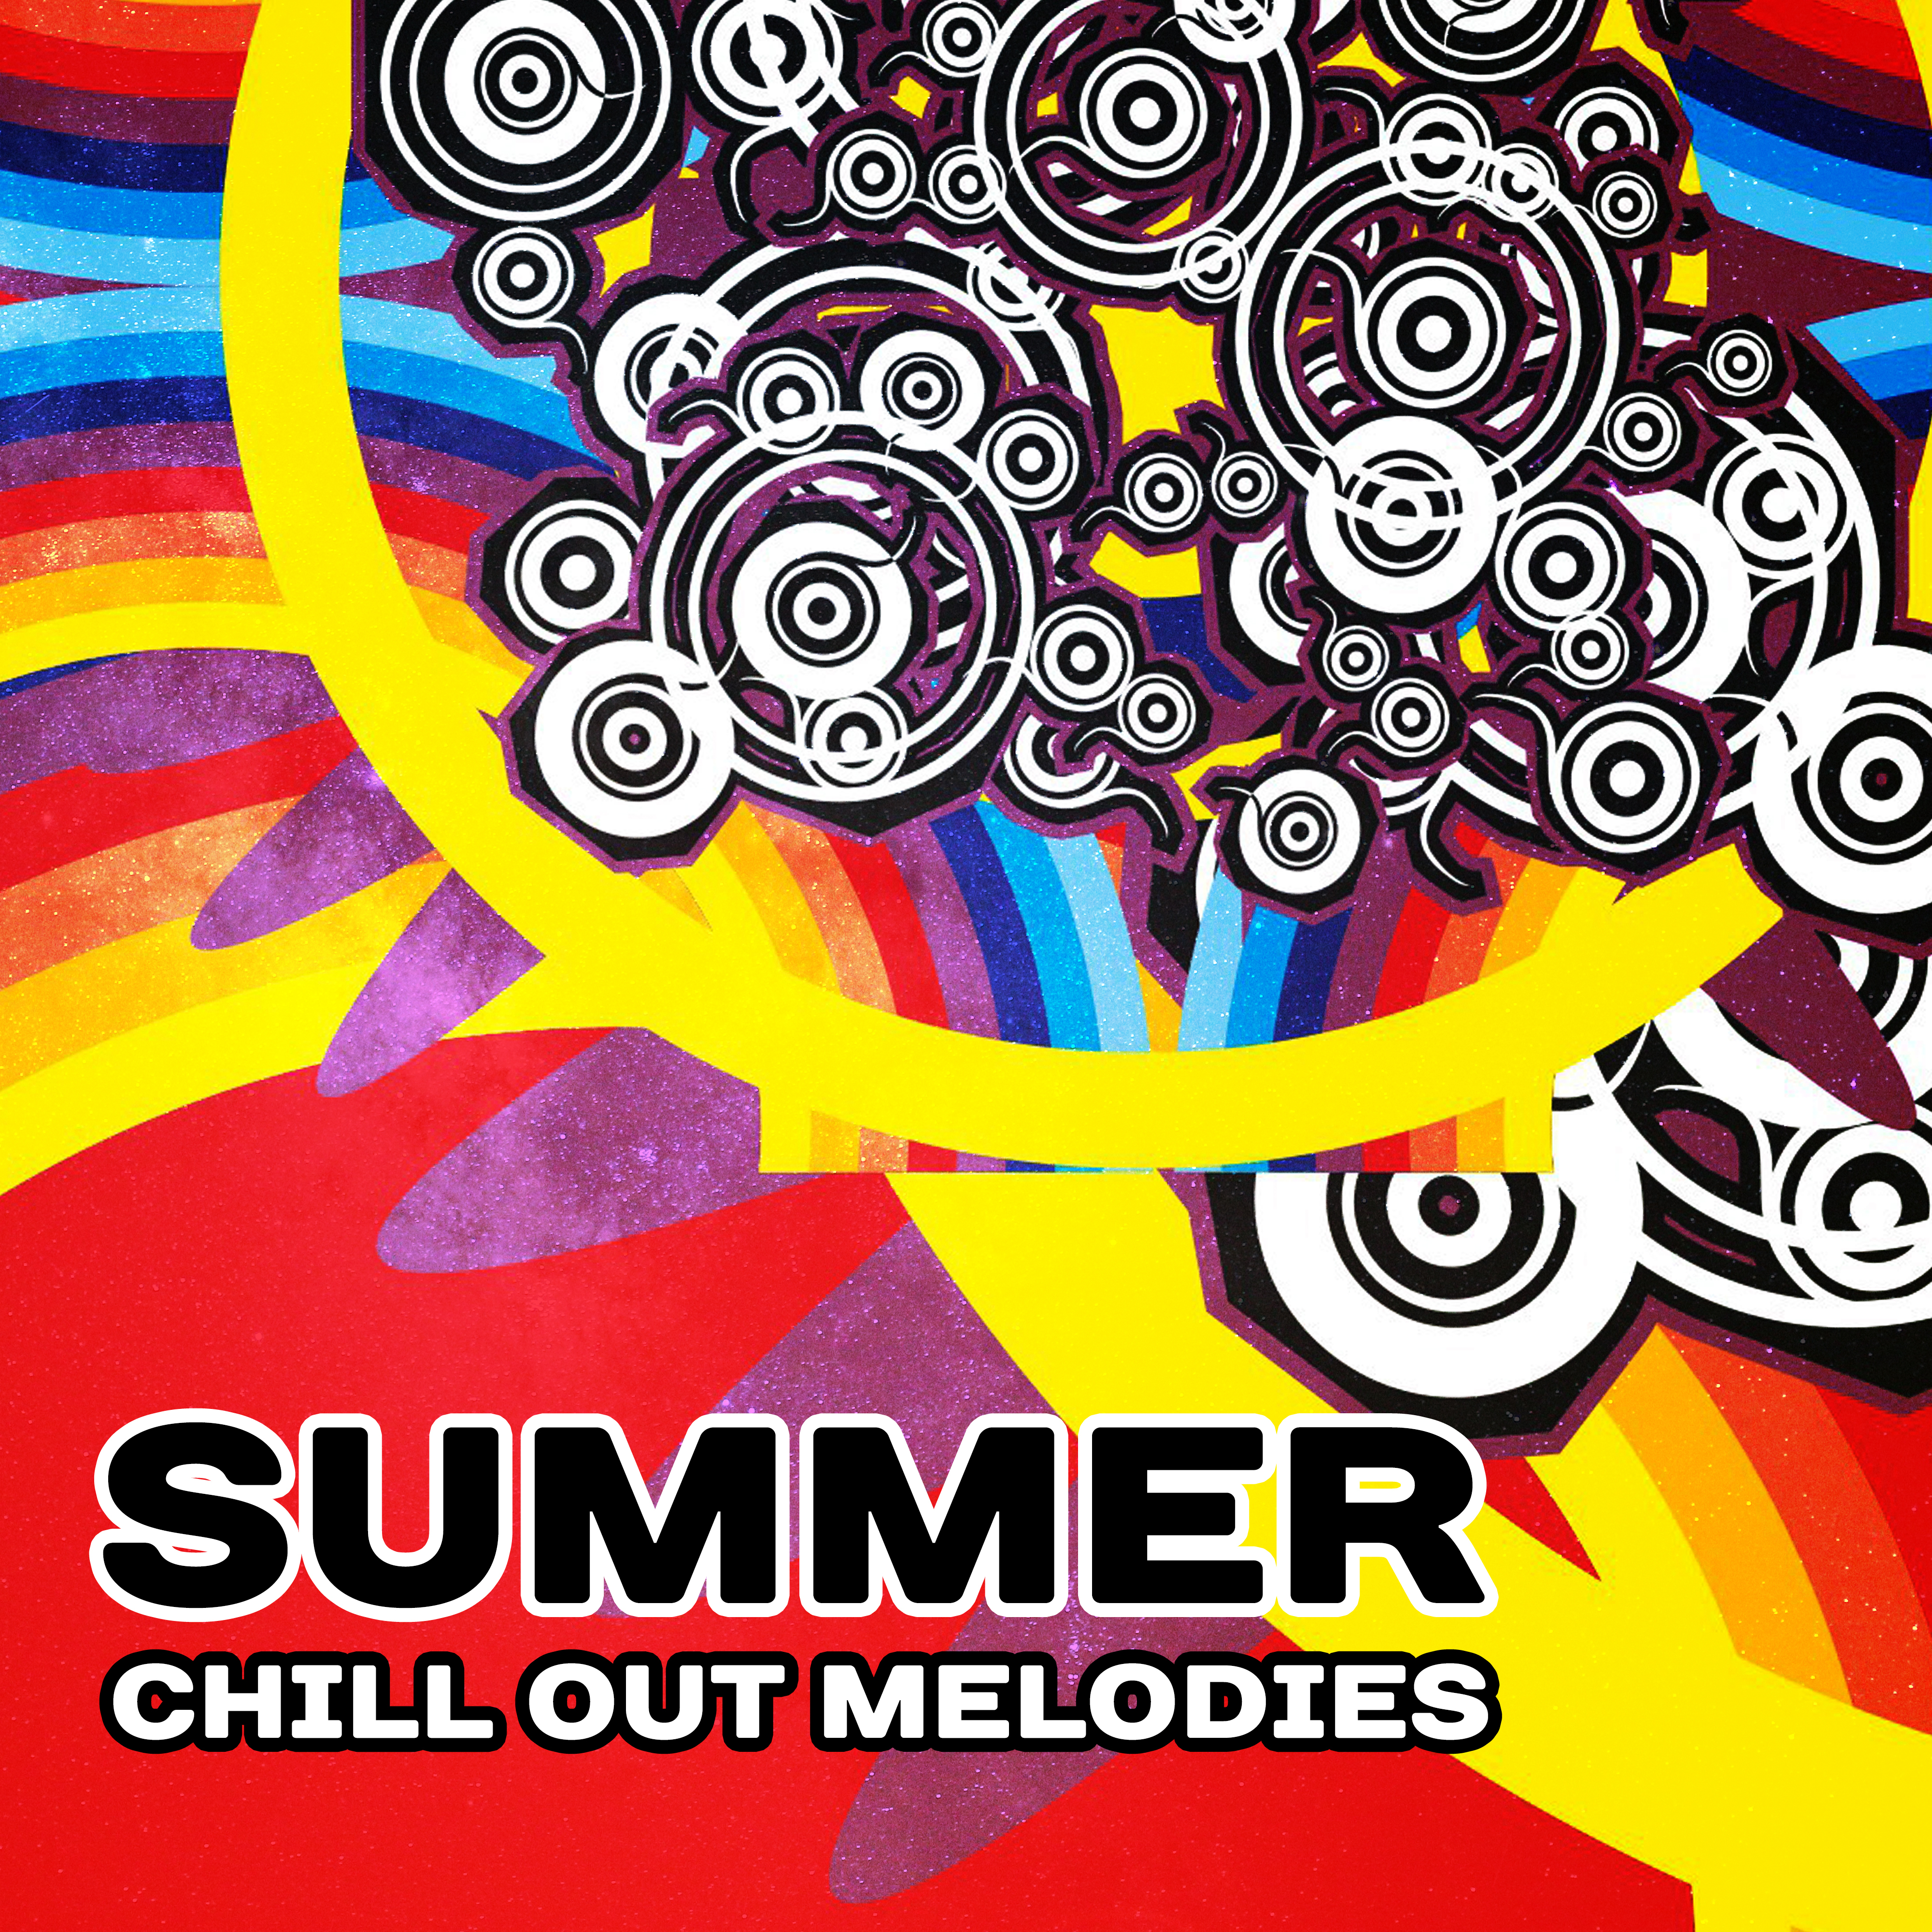 Summer Chill Out Melodies – Calm Sounds to Relax, Chill Out 2017, Holiday Music, Rest on the Island